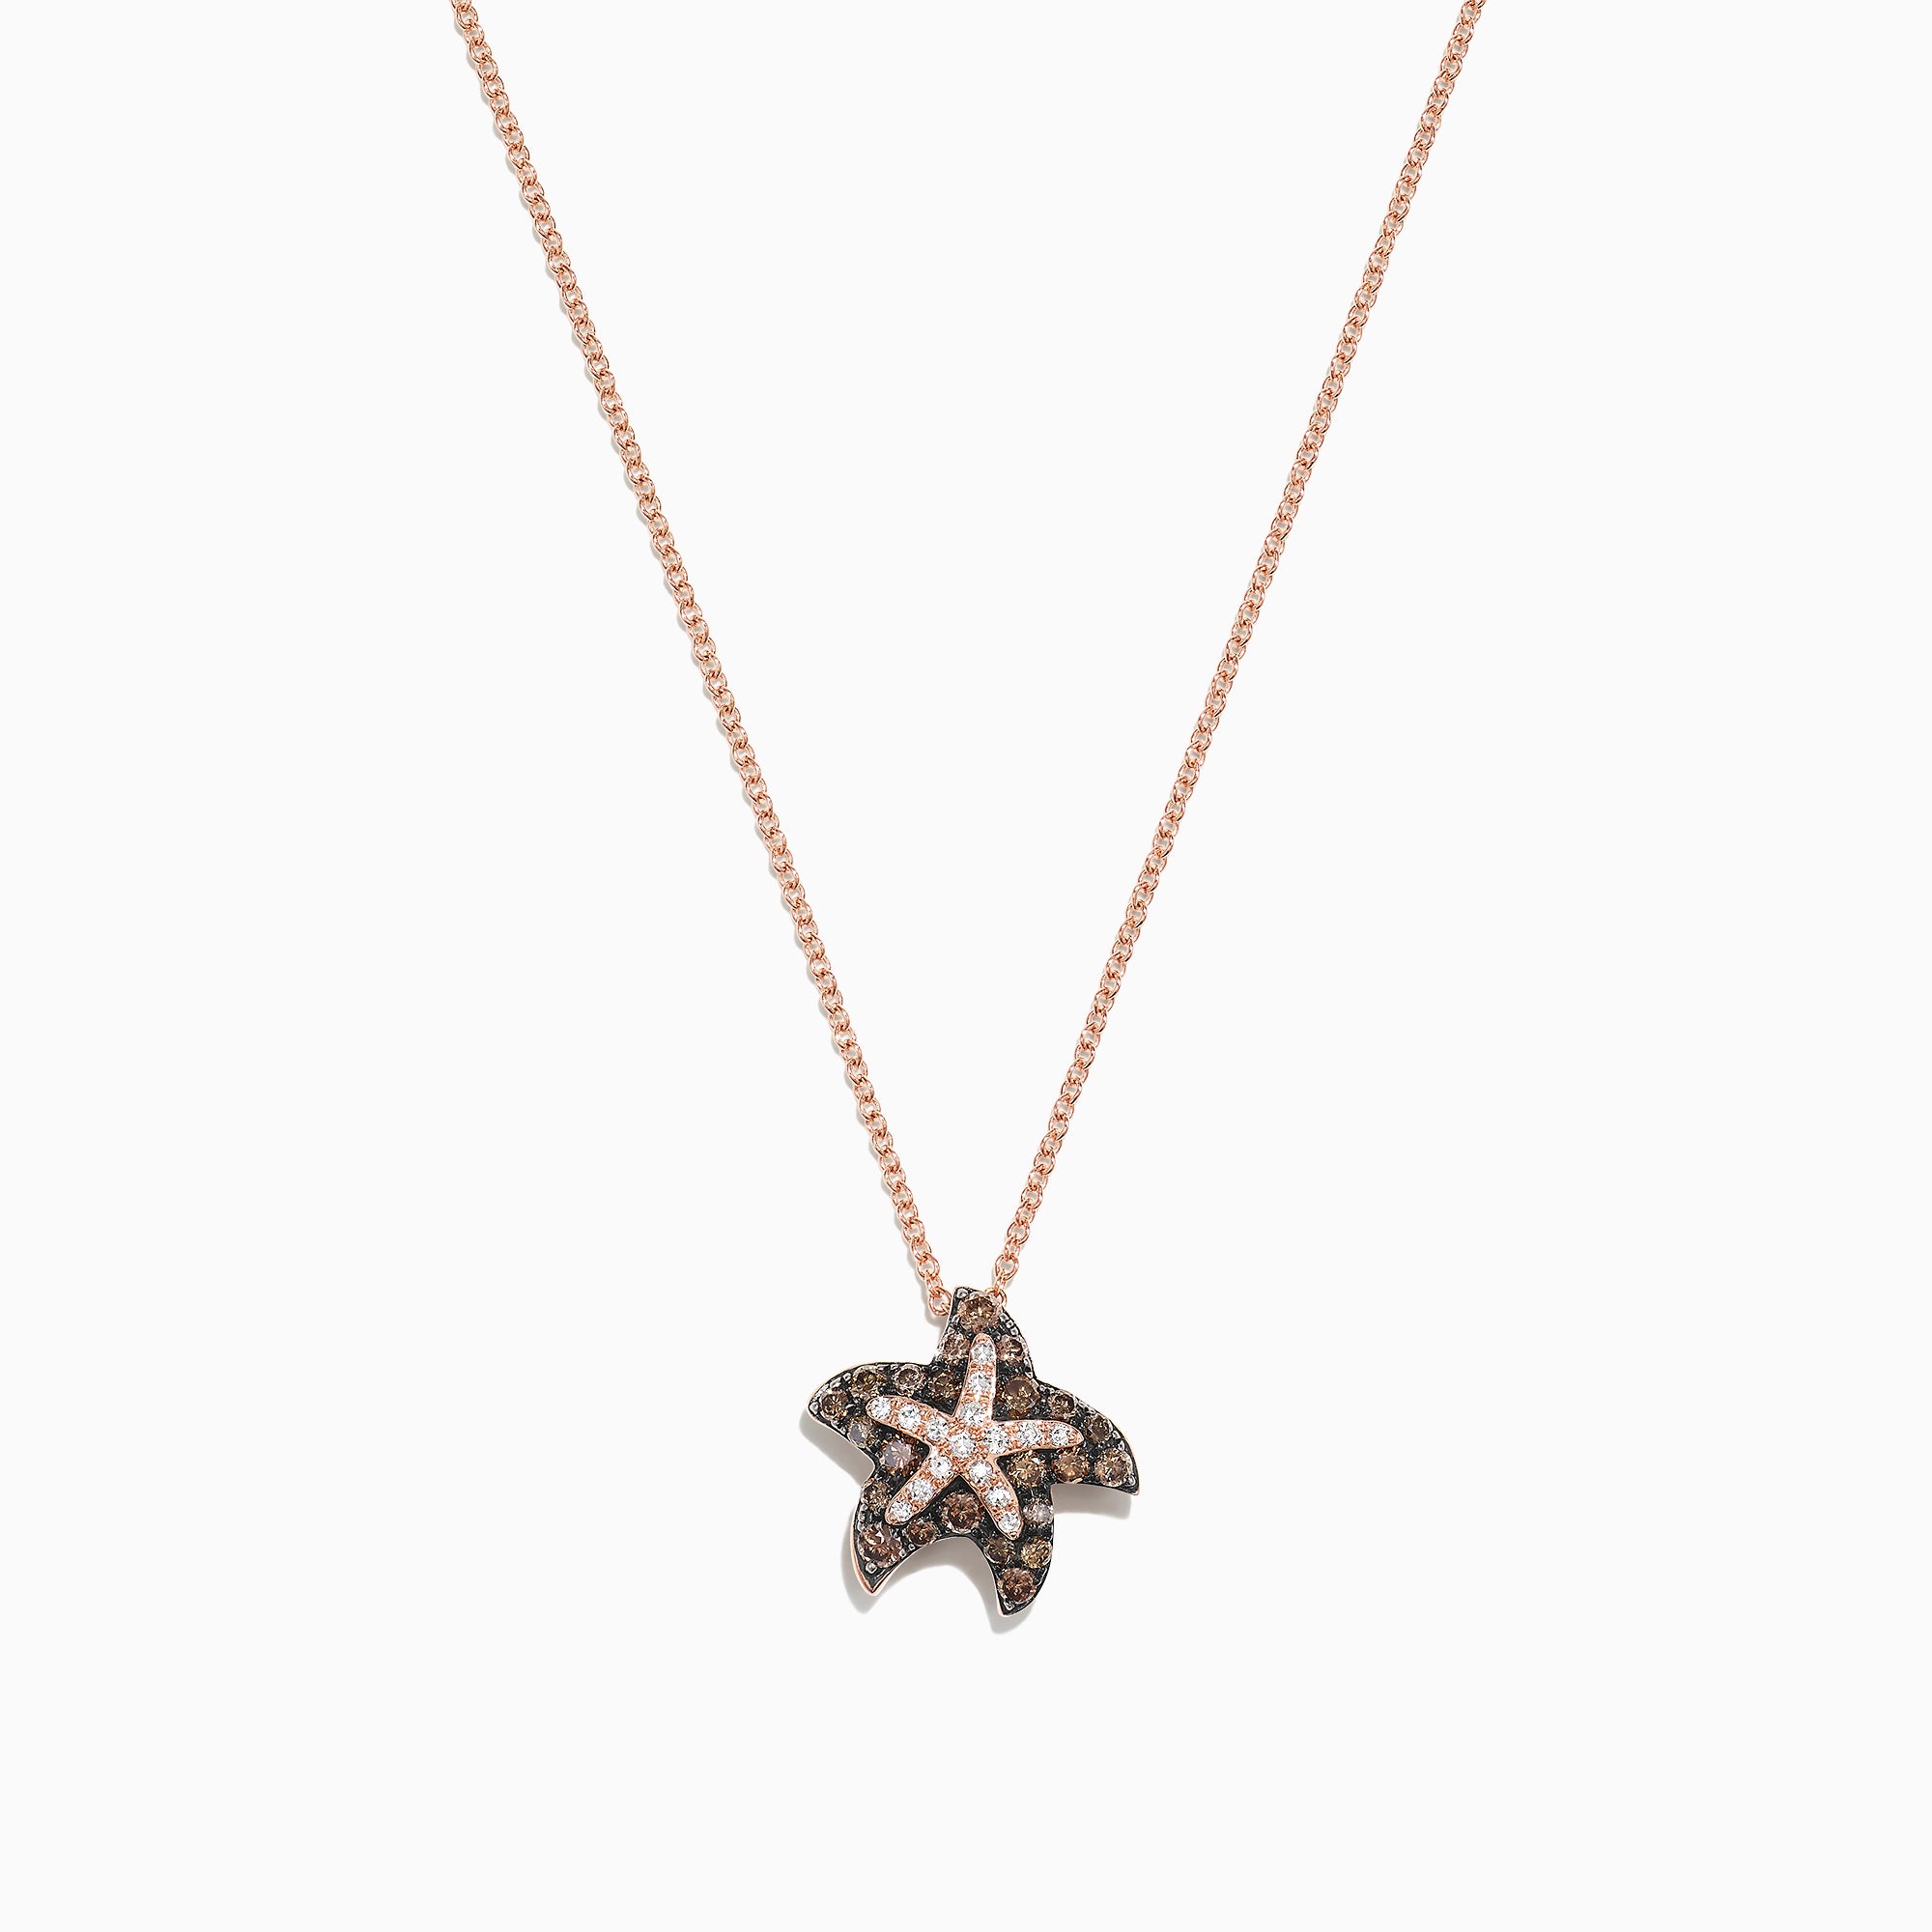 Buy 18K Solid Gold Diamond Starfish Necklace. Online in India - Etsy